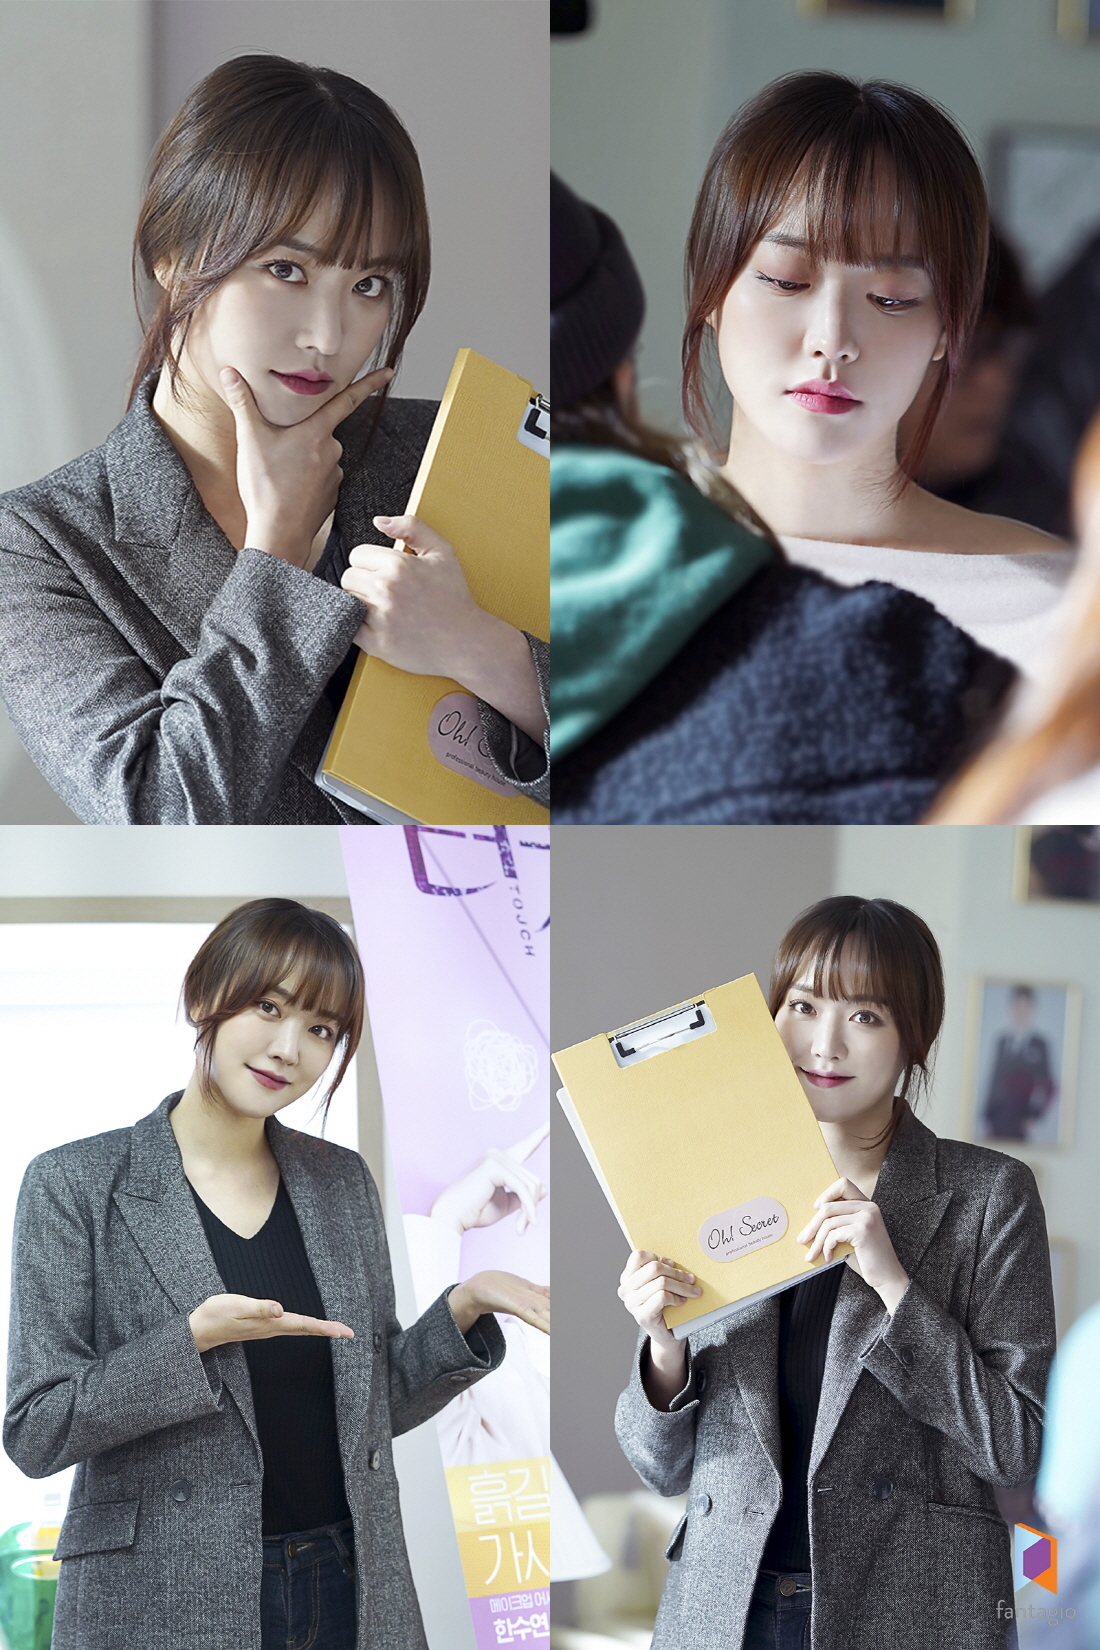 Fantasy O, a subsidiary company, released behind-the-scenes photos of Chae Joo-hwa, who is working as the Secretary of the beauty industrys No.1 Oh Si-eun (Vyeon Jeong-soo) on the channel A gilt drama Touch (directed by Min Yeon-hong, playwright Ahn Ho-kyung) through official SNS on the 6th.In the open photo, Chae Joo Hwa is transformed into a Secretary with a calm and charismatic atmosphere and concentrates on shooting.The fresh smile that I showed while meeting the camera in the middle of shooting emits bright energy and fills the filming scene brightly.Chae Joo-hwa, who made his debut as a group Hello Venus Lime and received a lot of love through the charm of Reversal story story that goes between cleanliness and sexy, changed his name from Lime to Chae Ju Hwa and started full-scale Actor activity.On the other hand, Touch, which is being played by Chae Joo Hwa, is broadcast every Friday and Saturday at 10:50 pm.